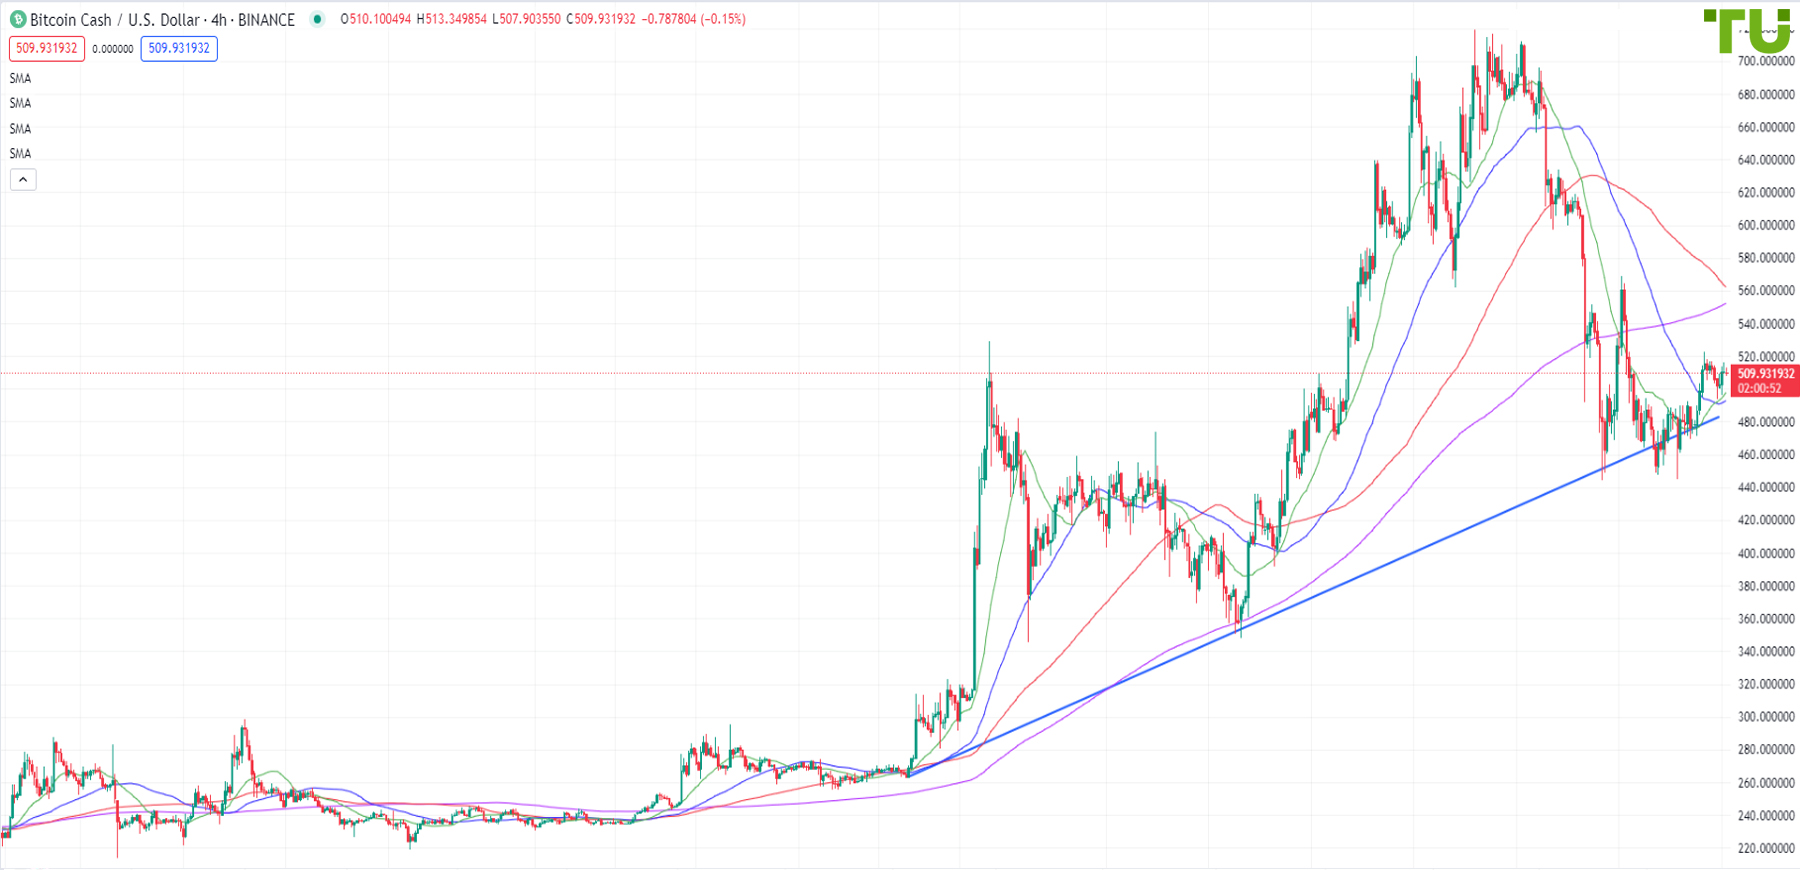 BCH/USD trades above the ascending support line